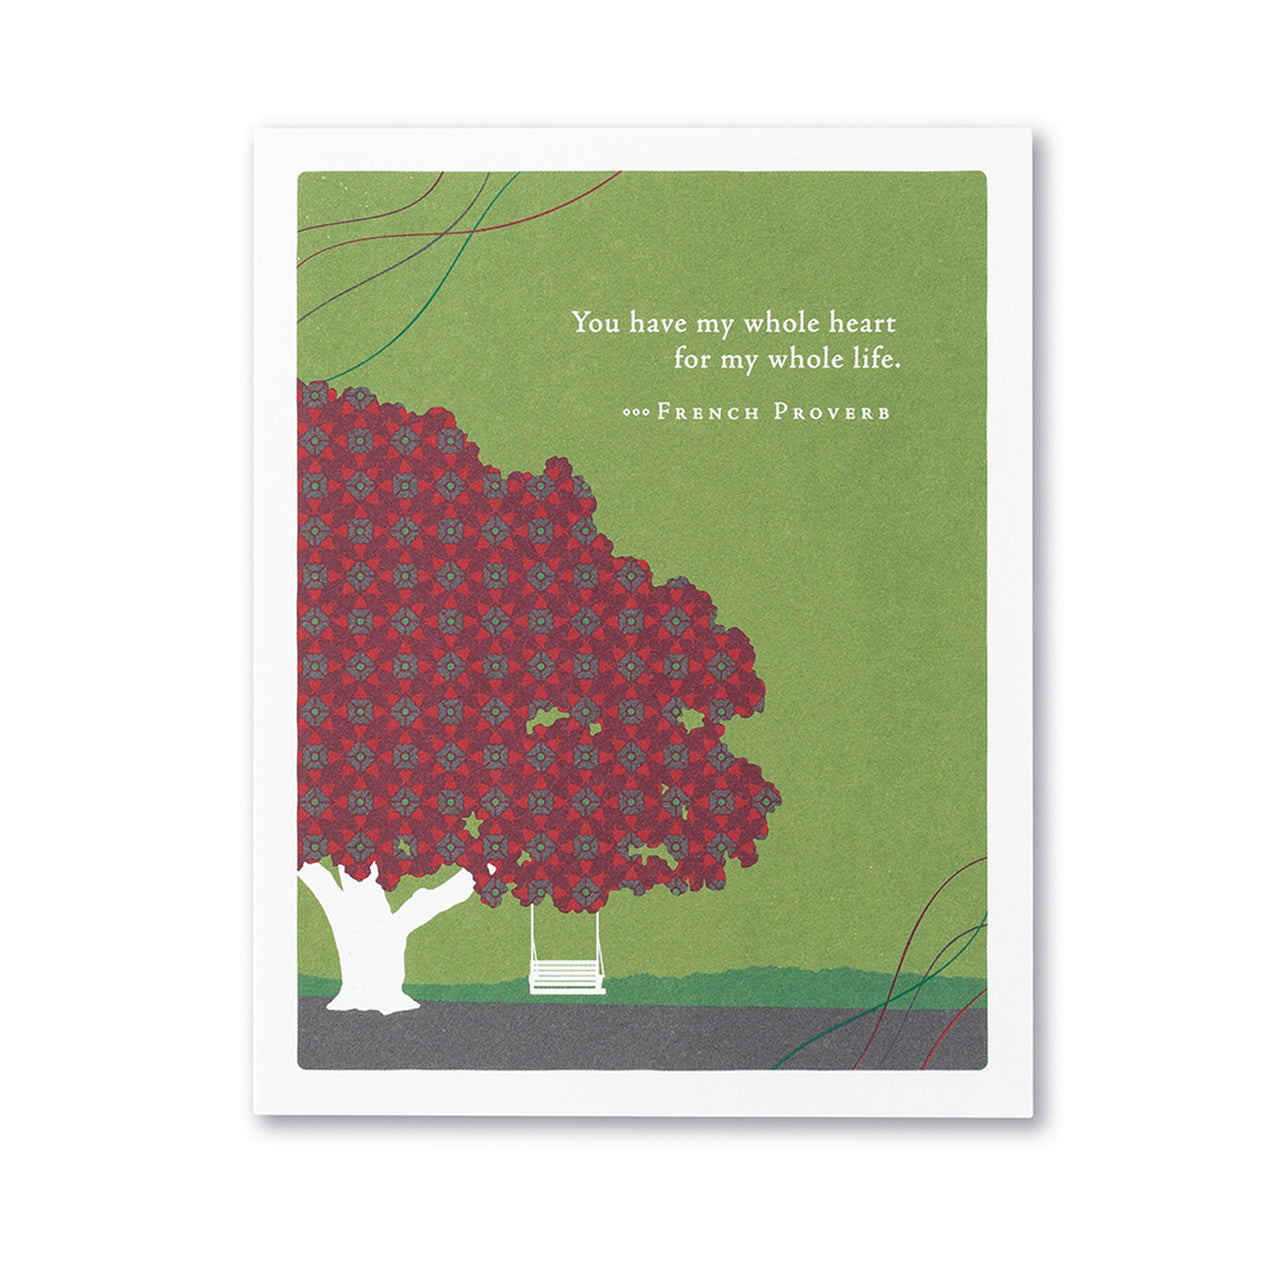 front of card is a drawing of a tree with a swing